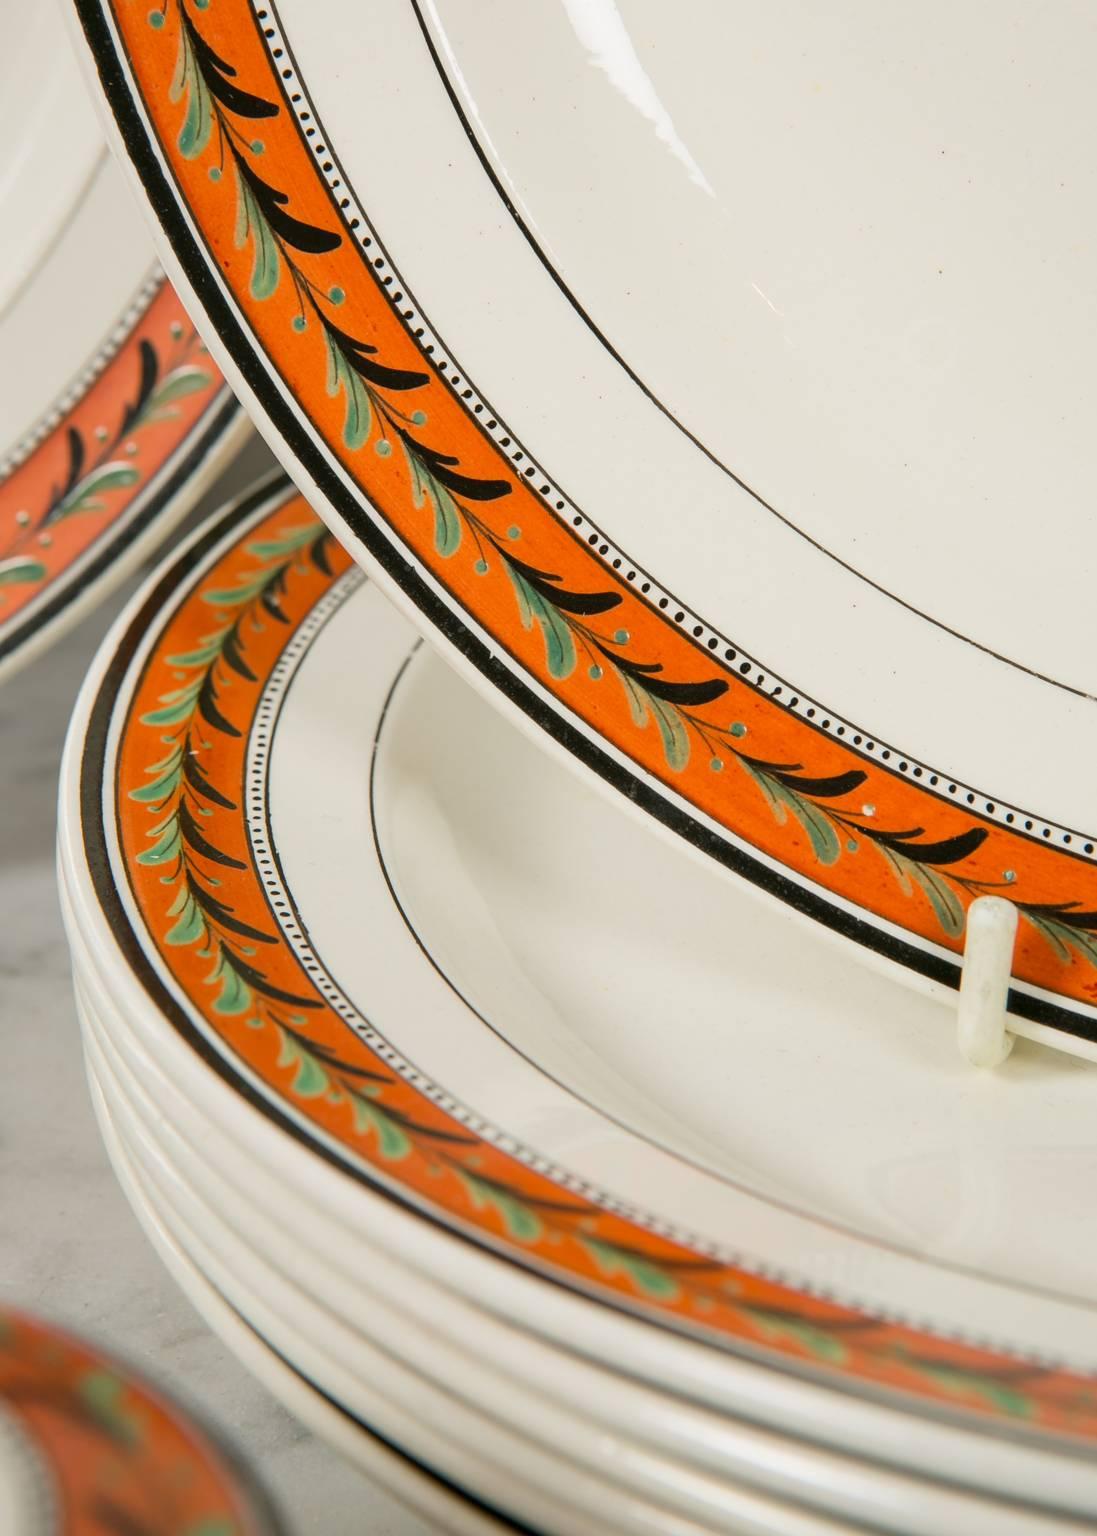 This set of creamware dishes features a beautiful border with a pattern of laurel painted in green and black on an orange ground. Laurel is a neoclassical motif. A laurel wreath is a symbol of victory and honor dating back to Greek and Roman times.
